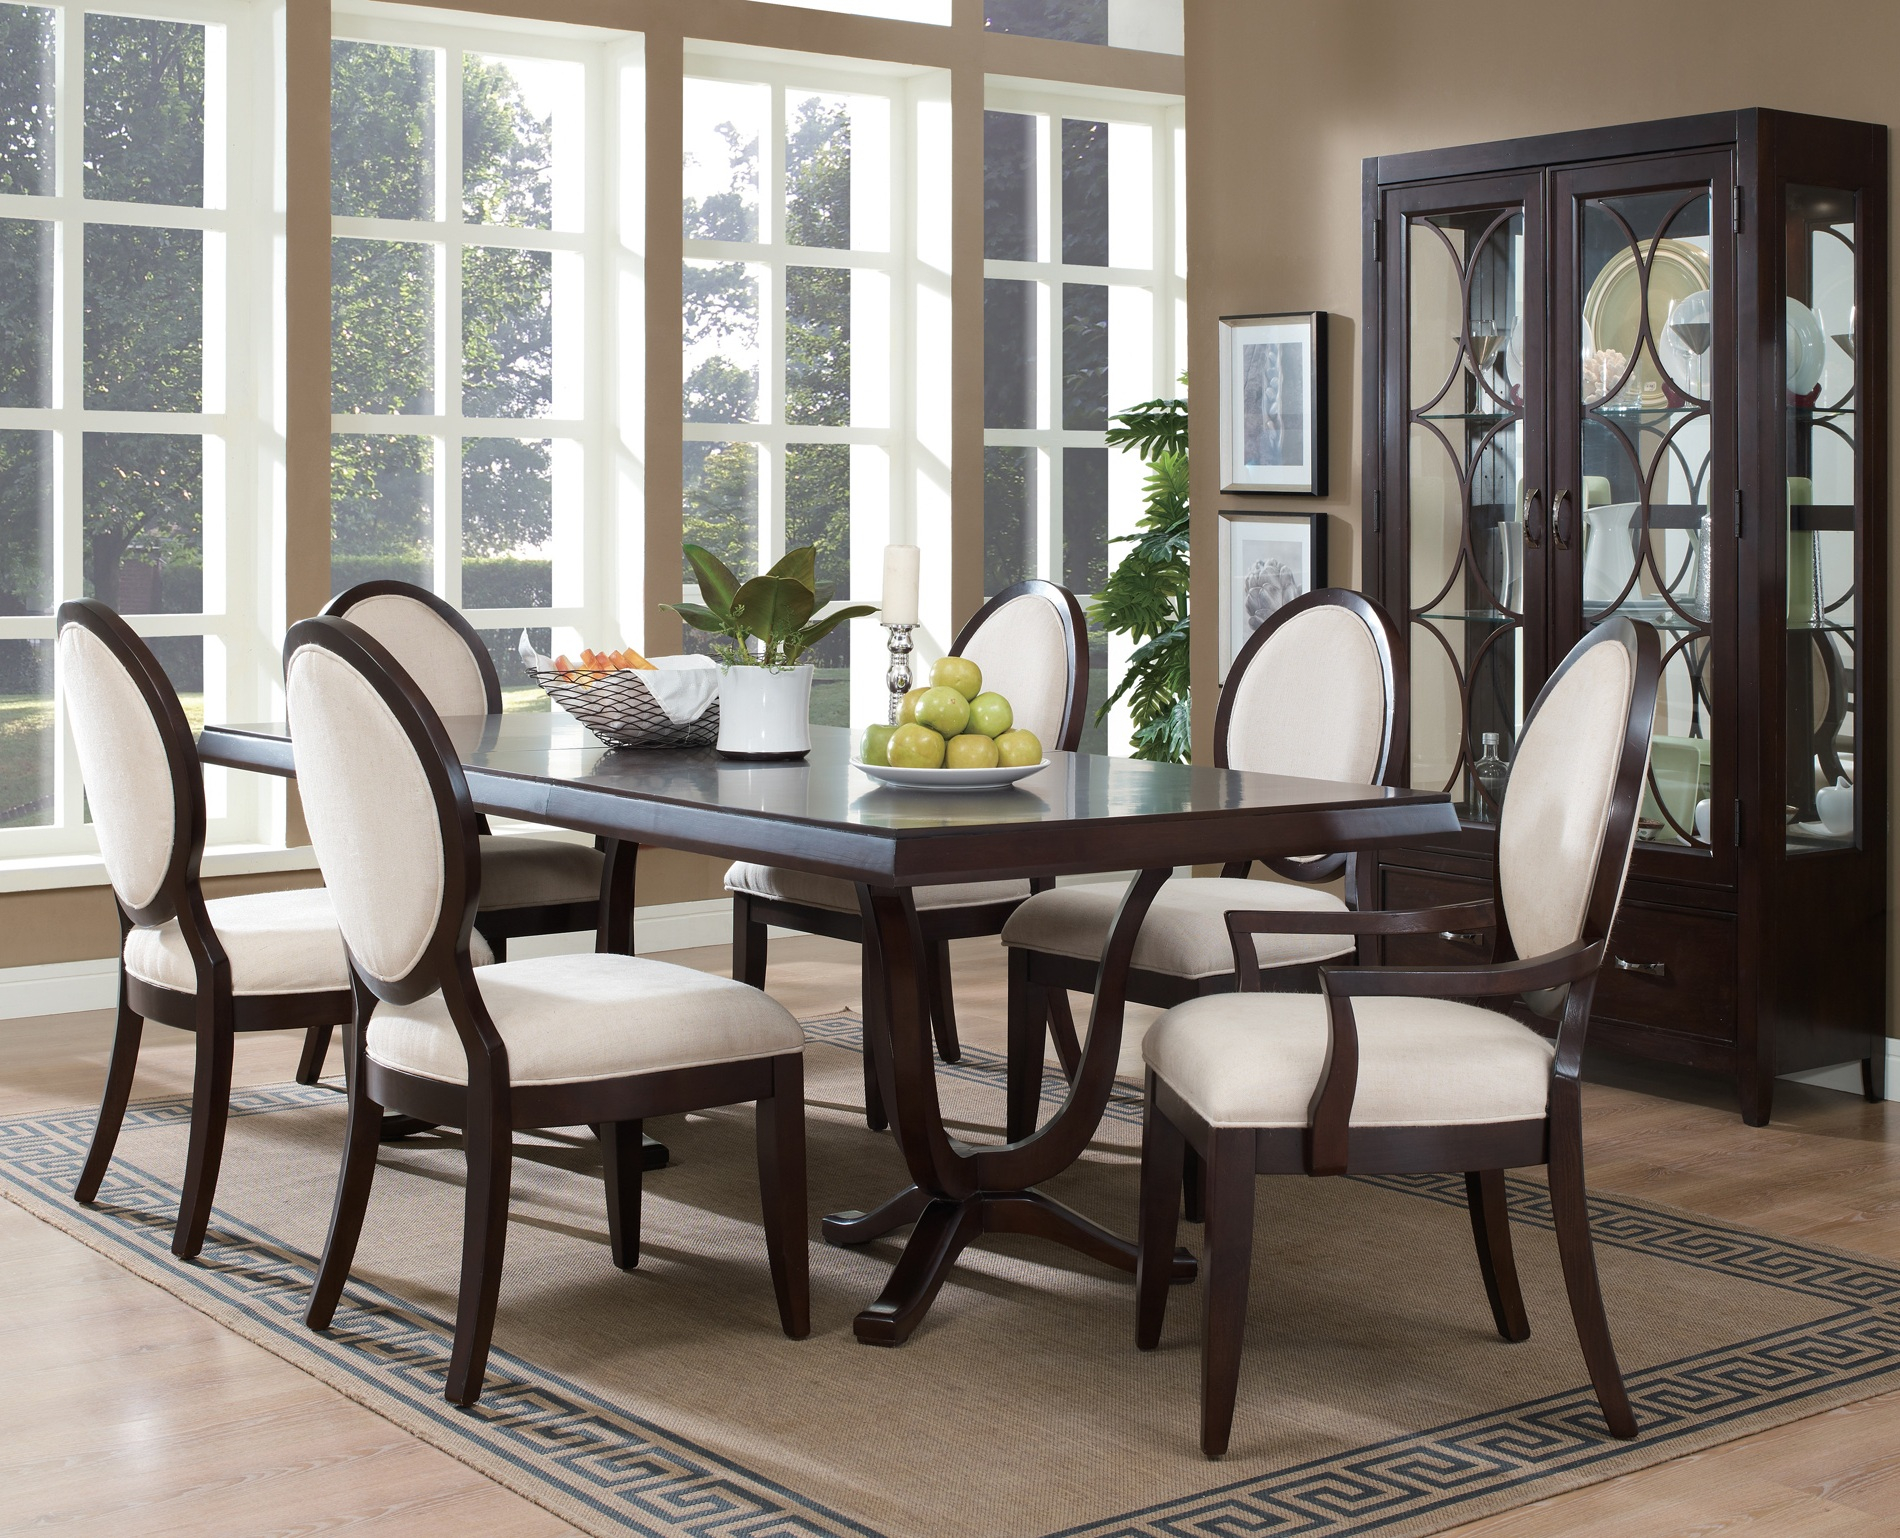 Dining Room Table And Chairs Ideas With Images intended for proportions 1900 X 1538